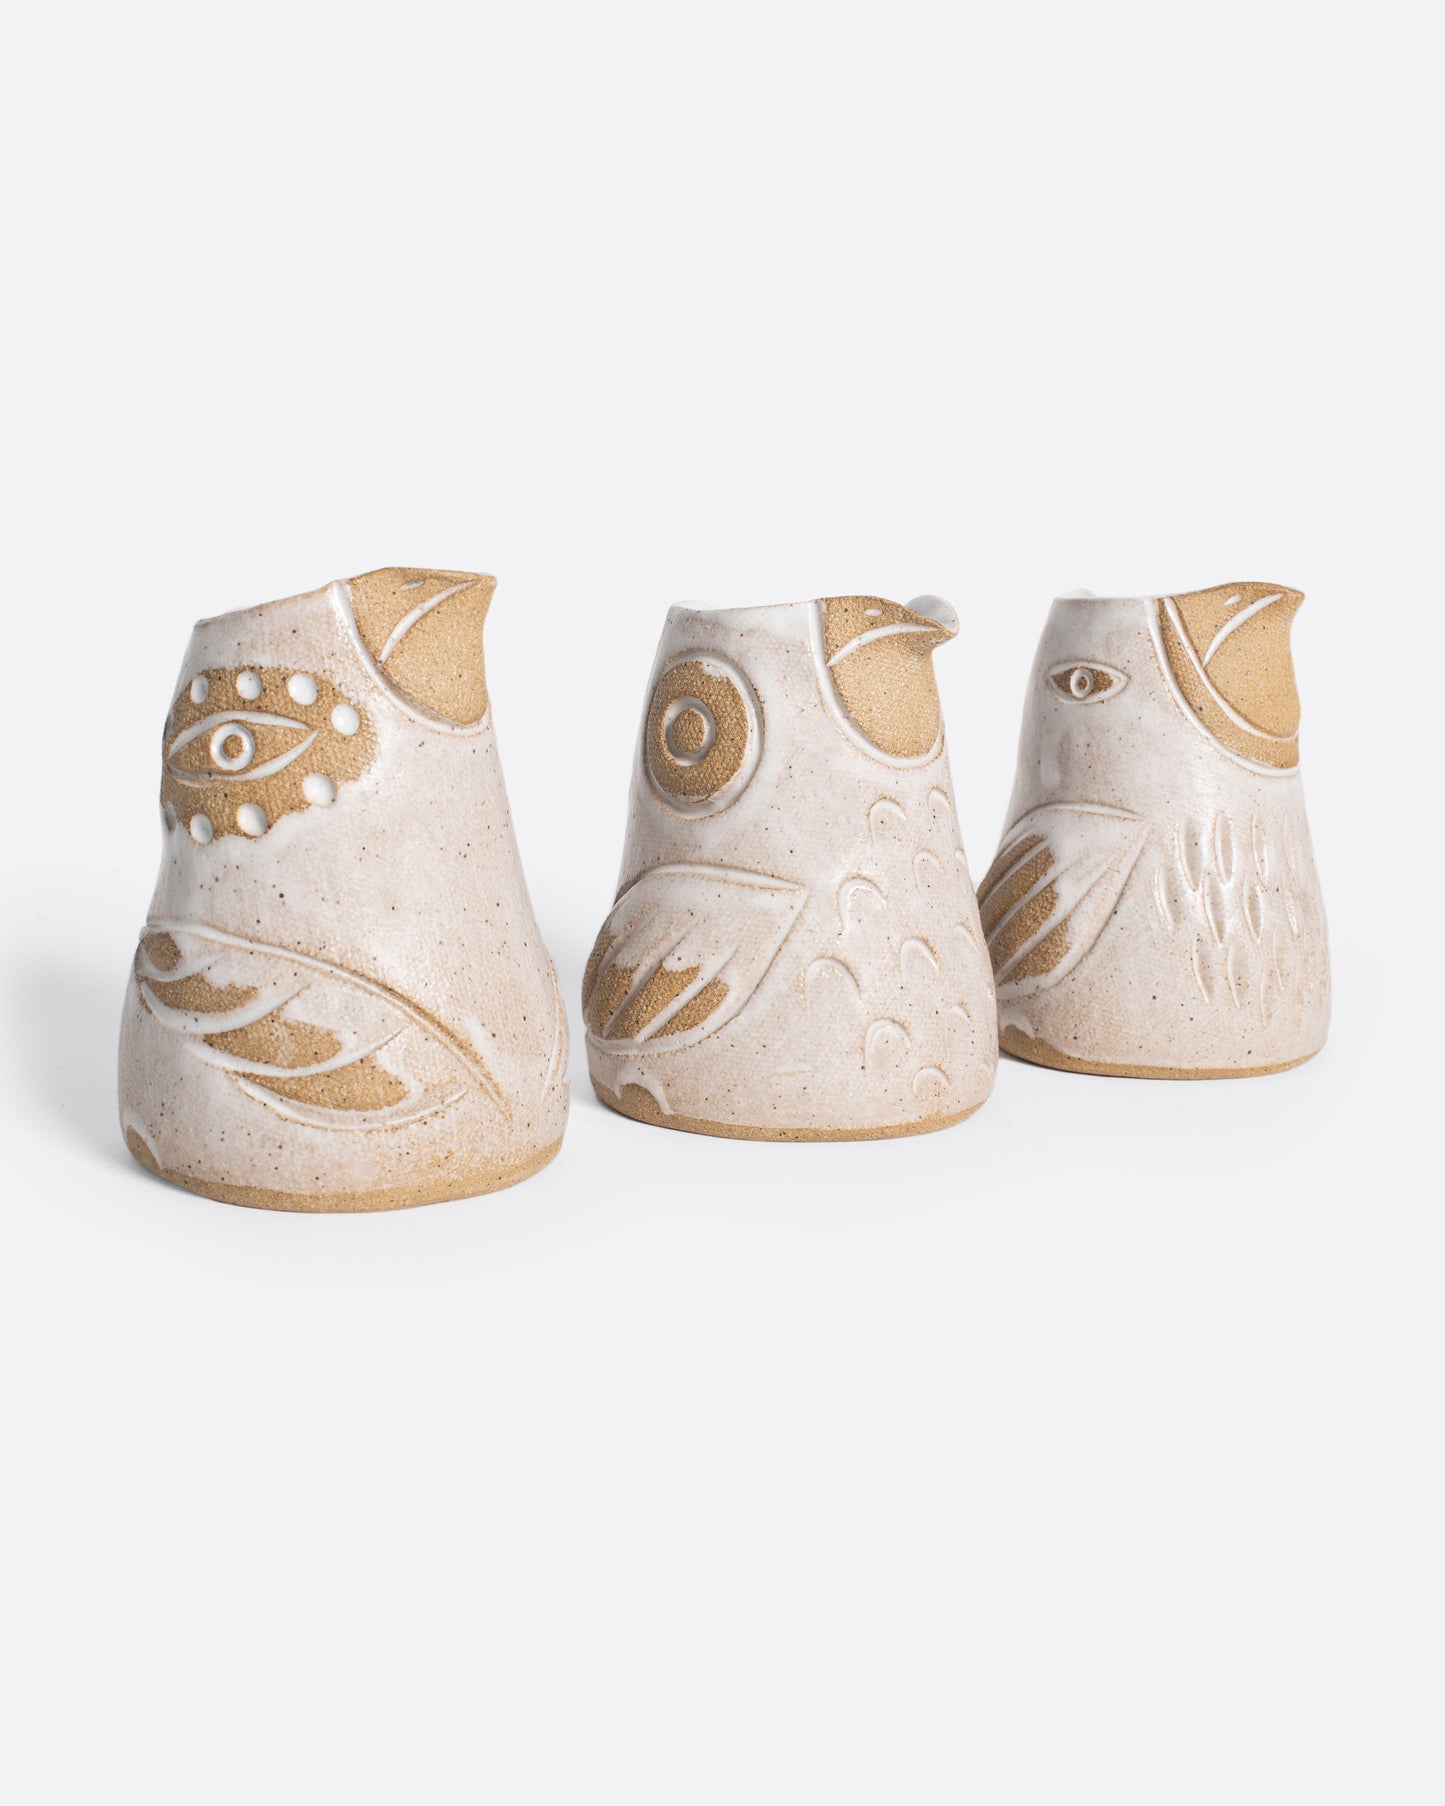 Angled line of three creamers shaped like birds in white and brown.